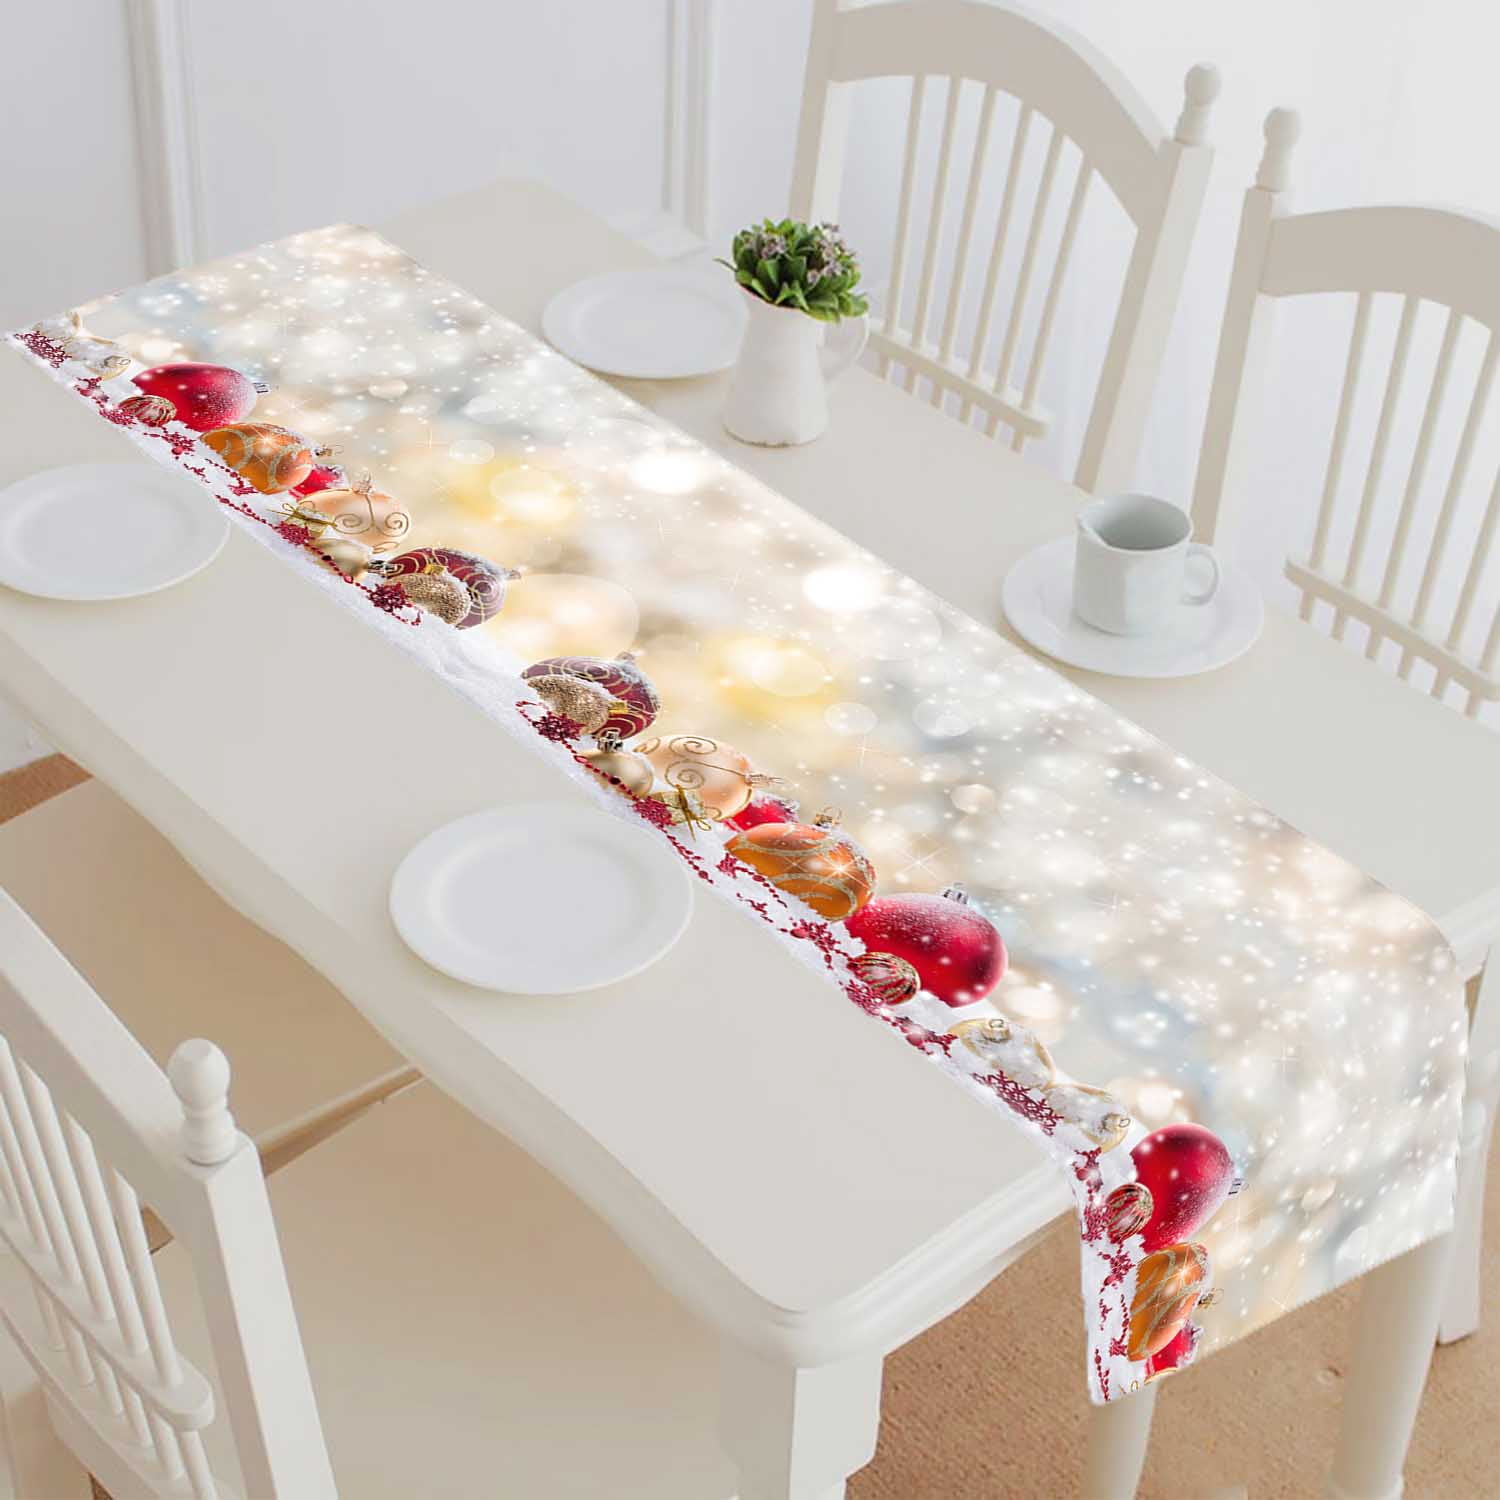 ALAZA Horses and Flowers Table Runner for Party Wedding Kitchen Dining Living Room Restaurant Table Linen Decor 